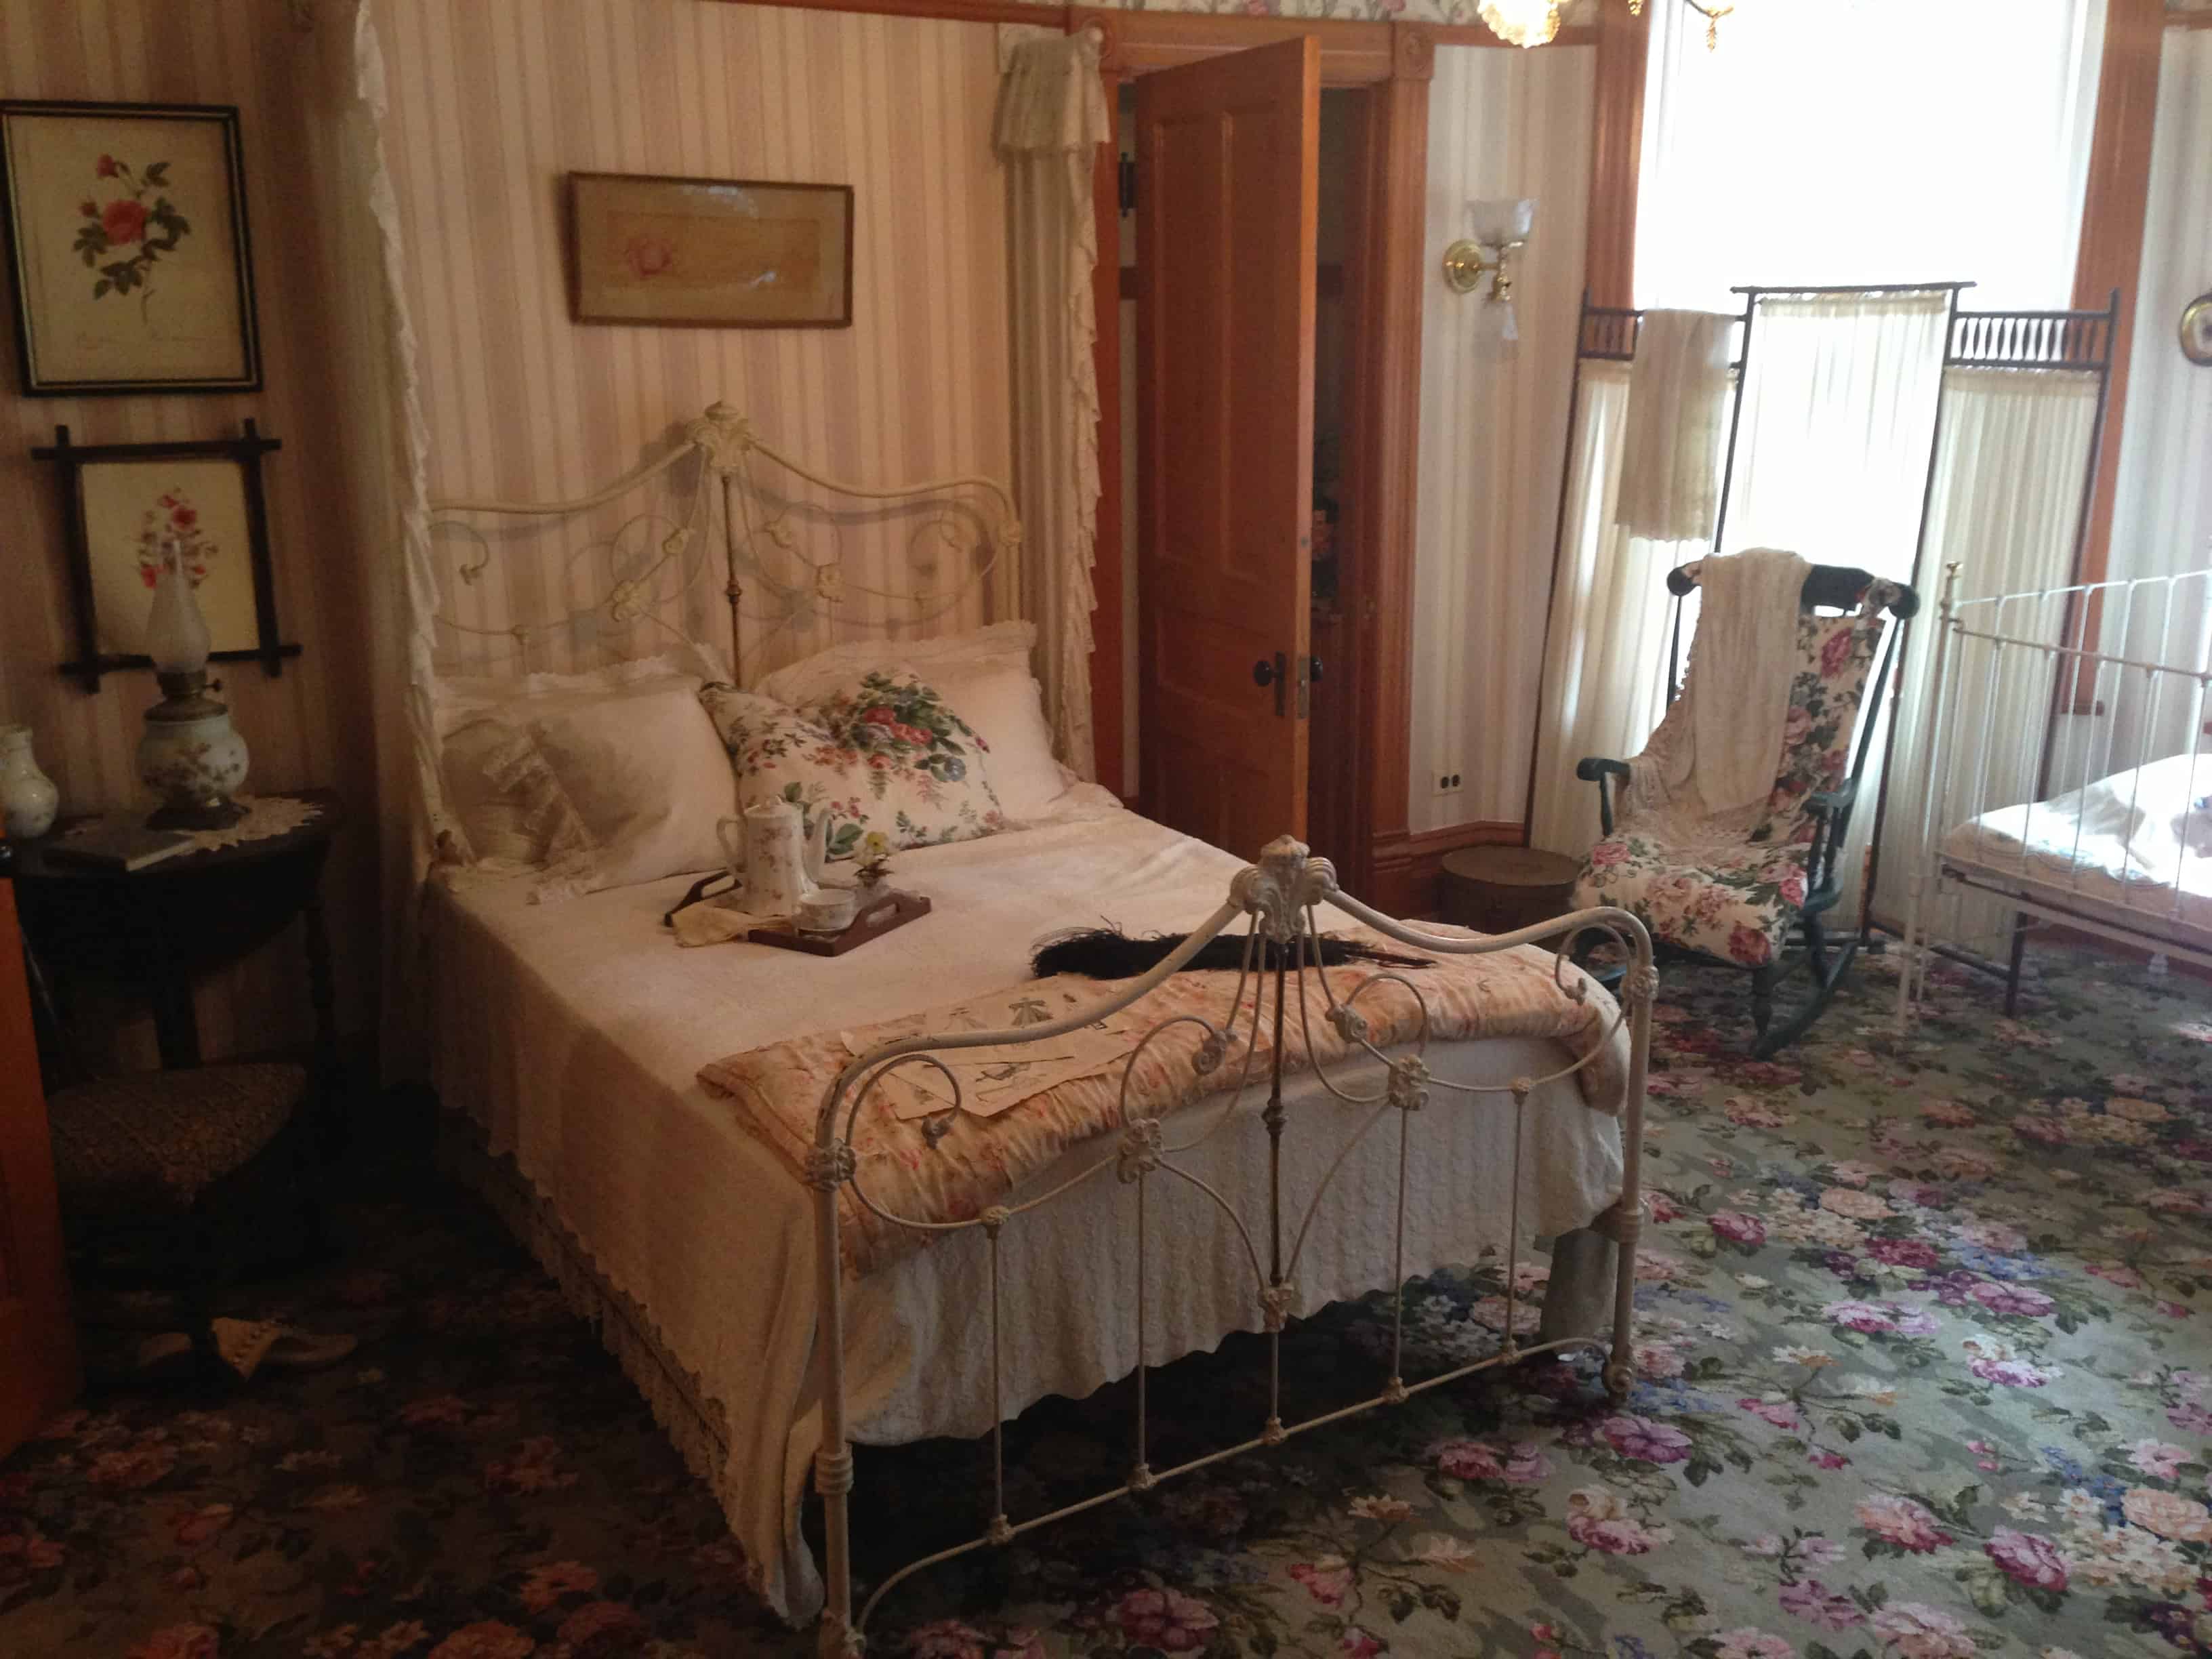 Hemingway's mother's bedroom at the Ernest Hemingway Birthplace in Oak Park, Illinois